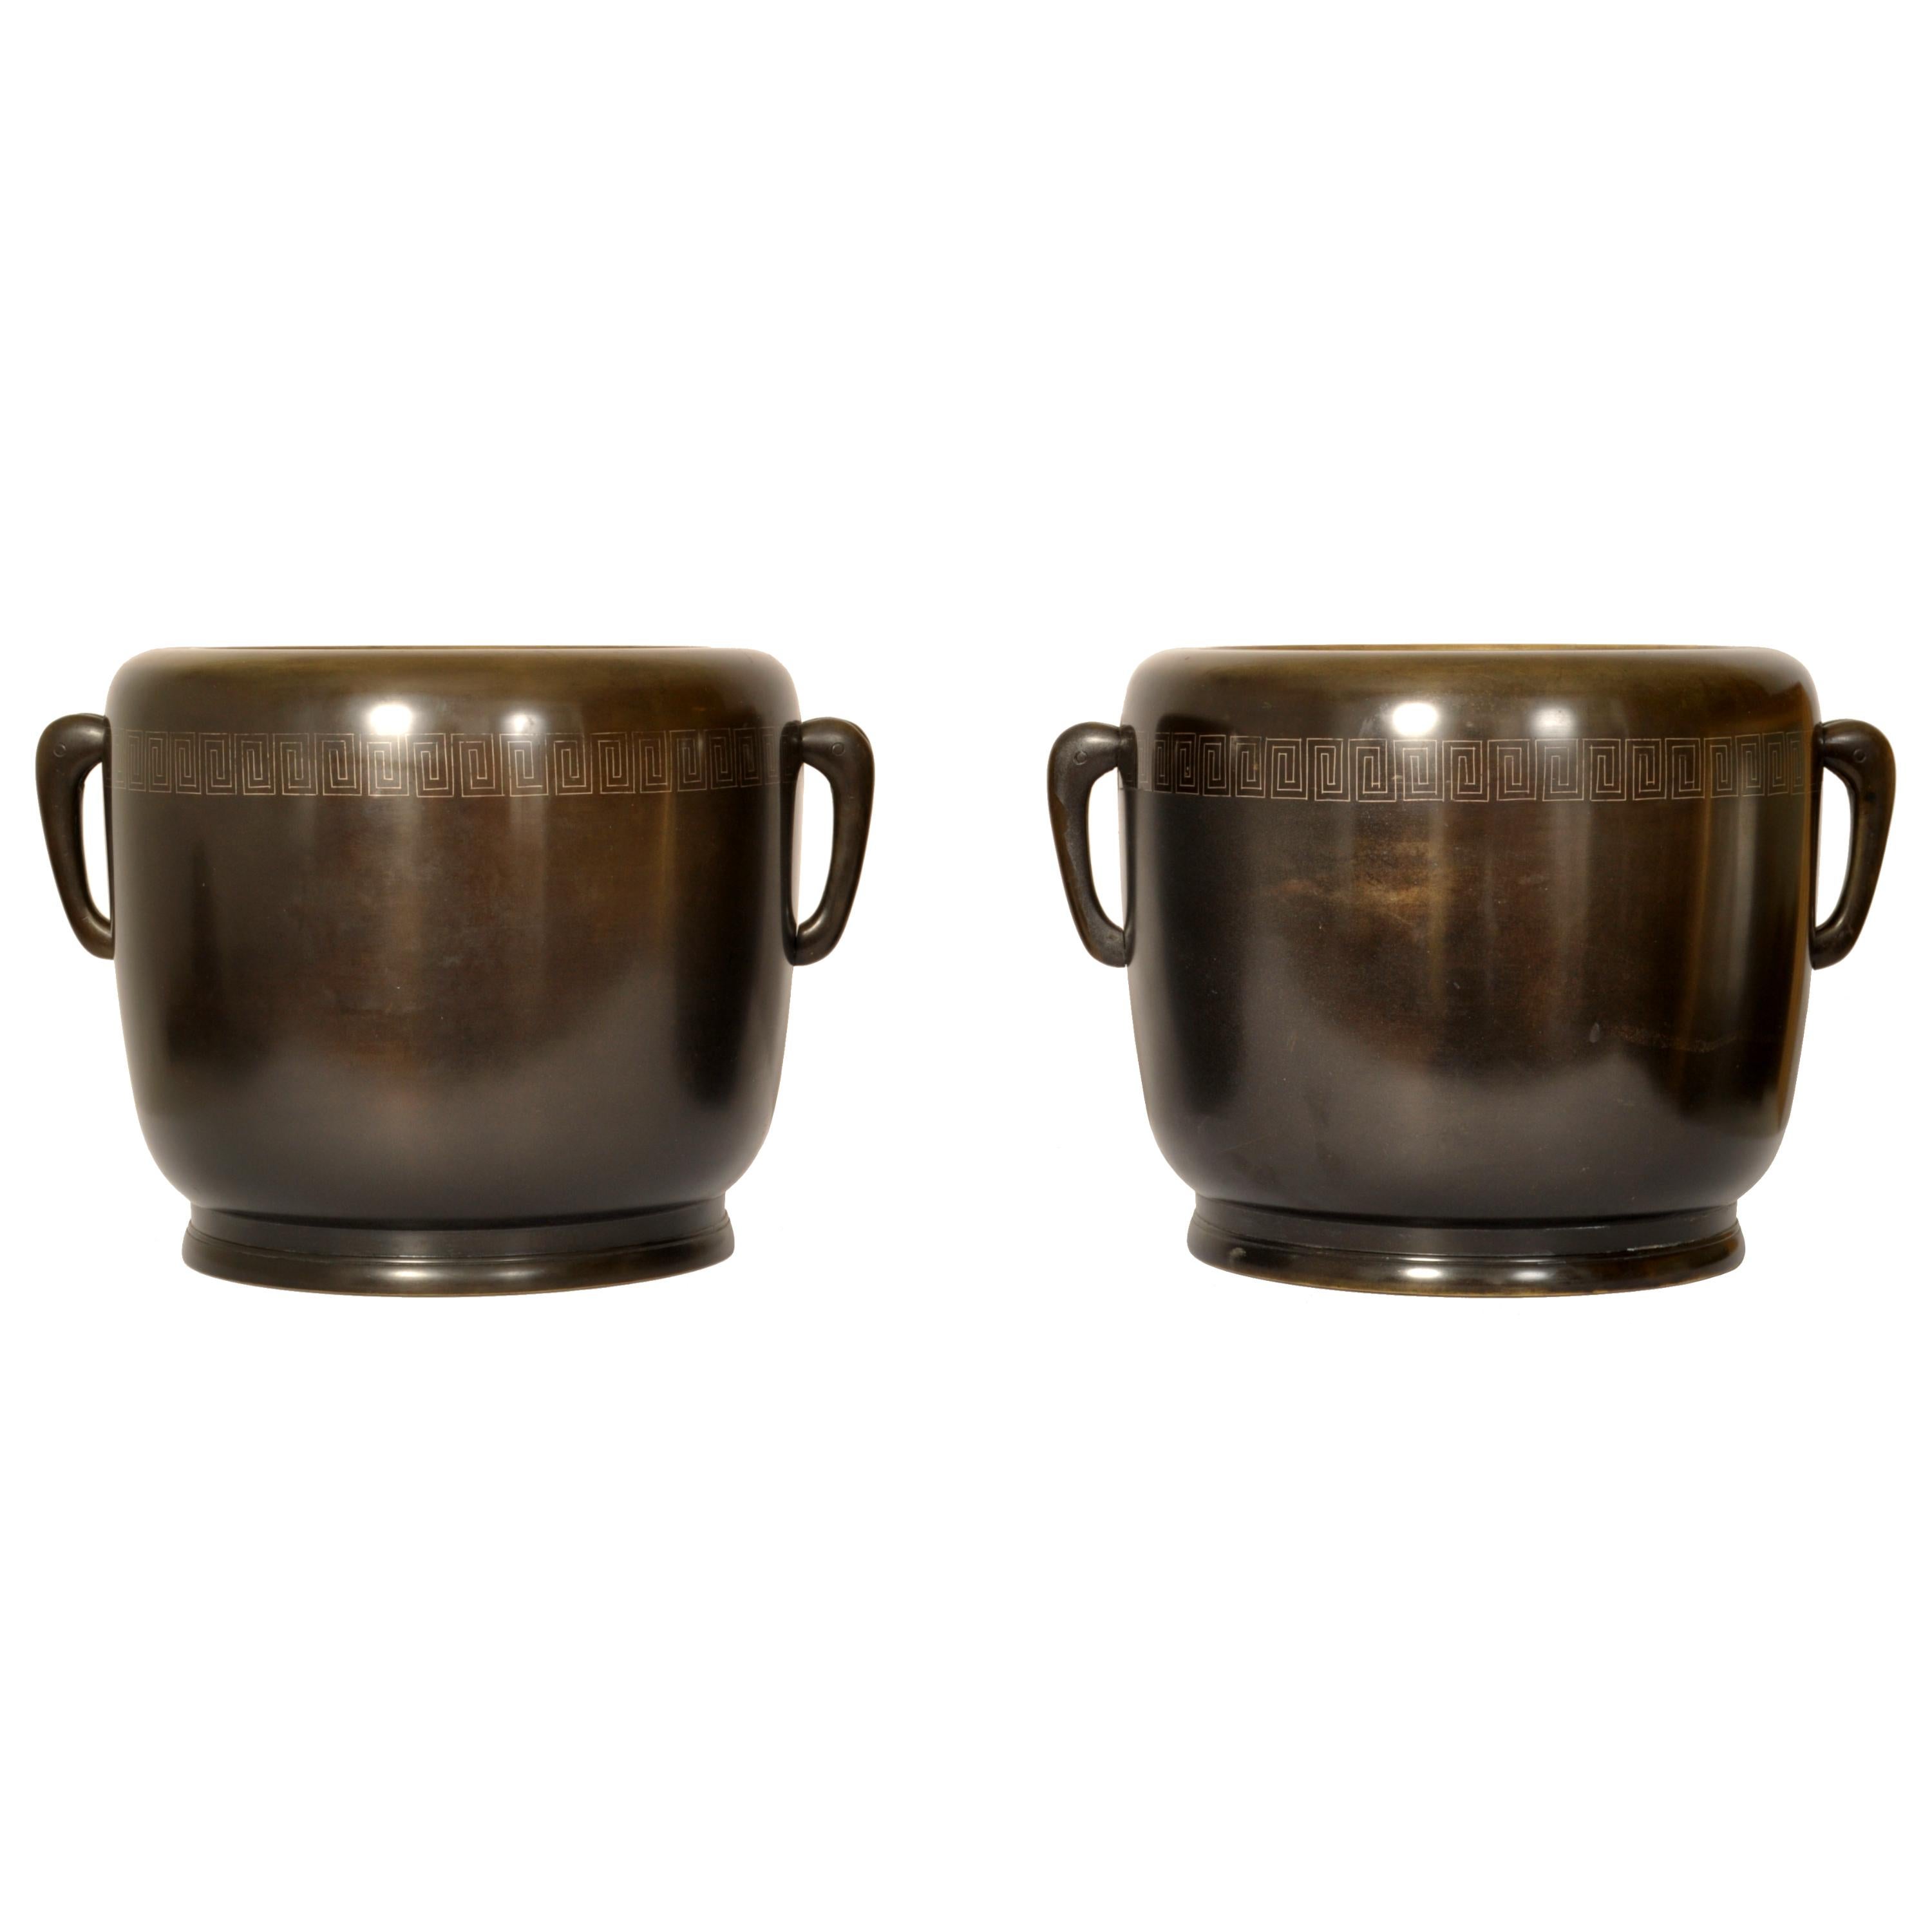 A very stylish pair of antique Japanese Meiji period (1868-1912) bronze hibachi or censers, circa 1890.
Of rounded form with a band of 'Greek key' decoration, to each side is a zoomorphic stylized elephant handle. Both censers are raised on a